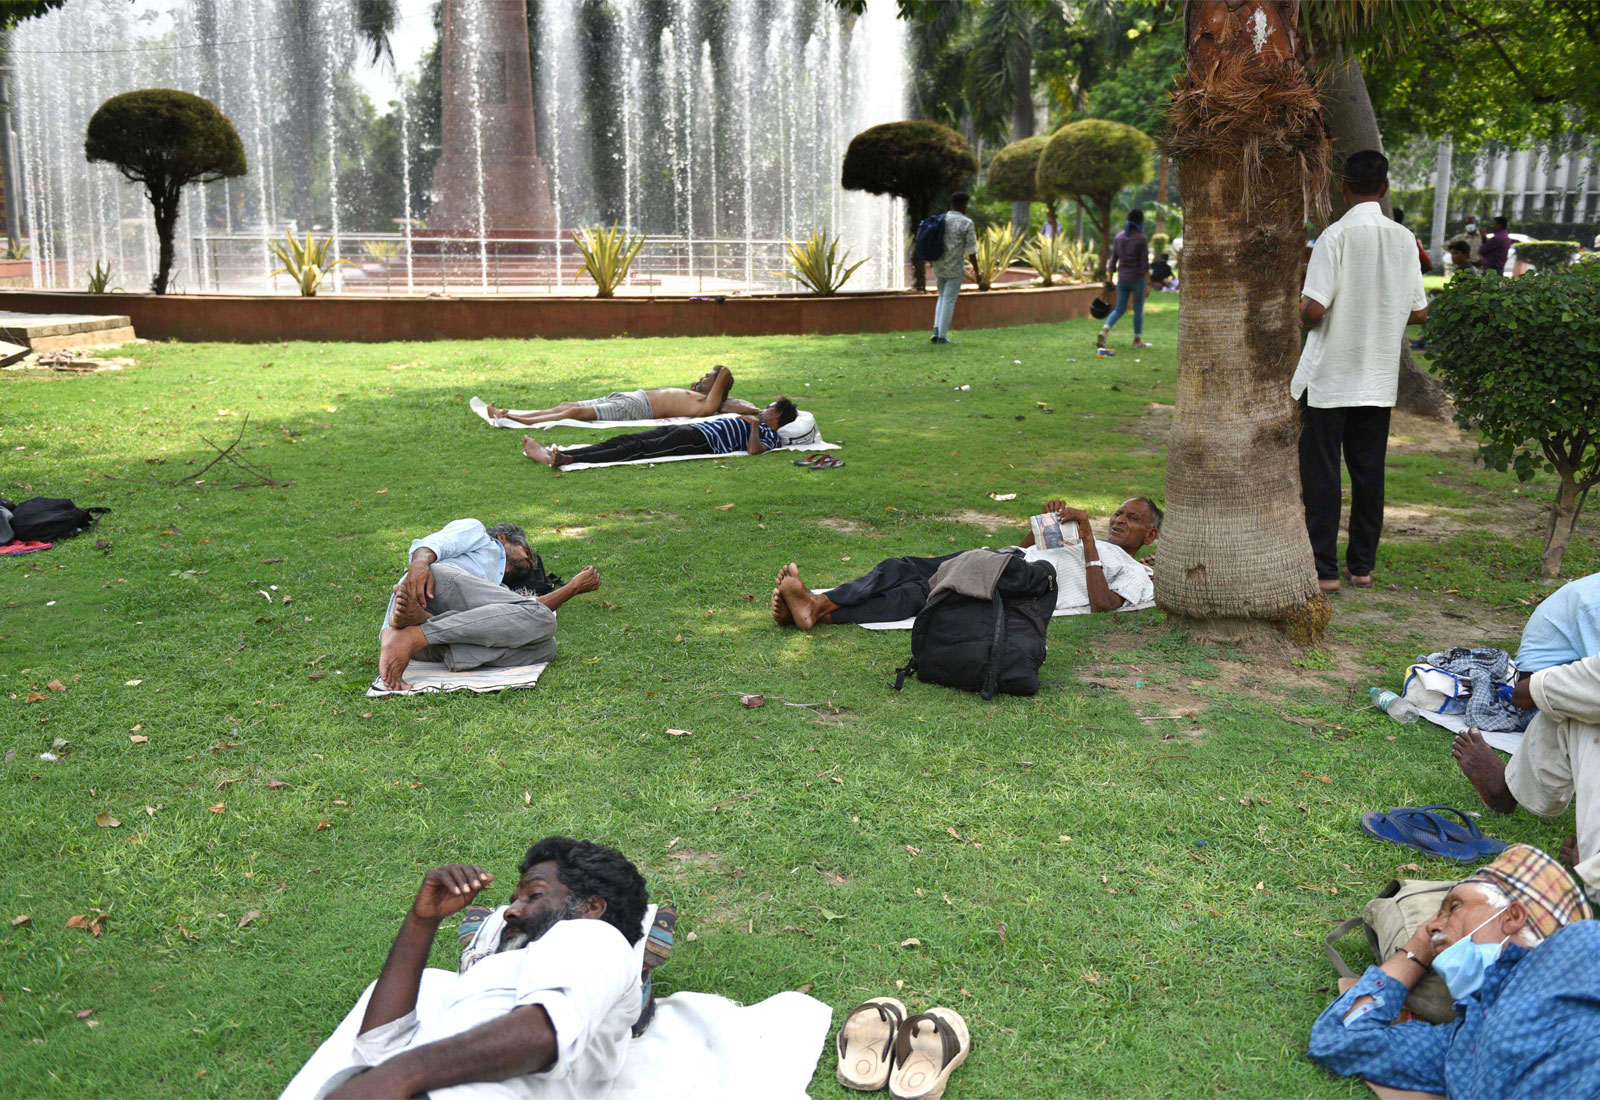 Multiple people in India lying on grass with a fountain in the background